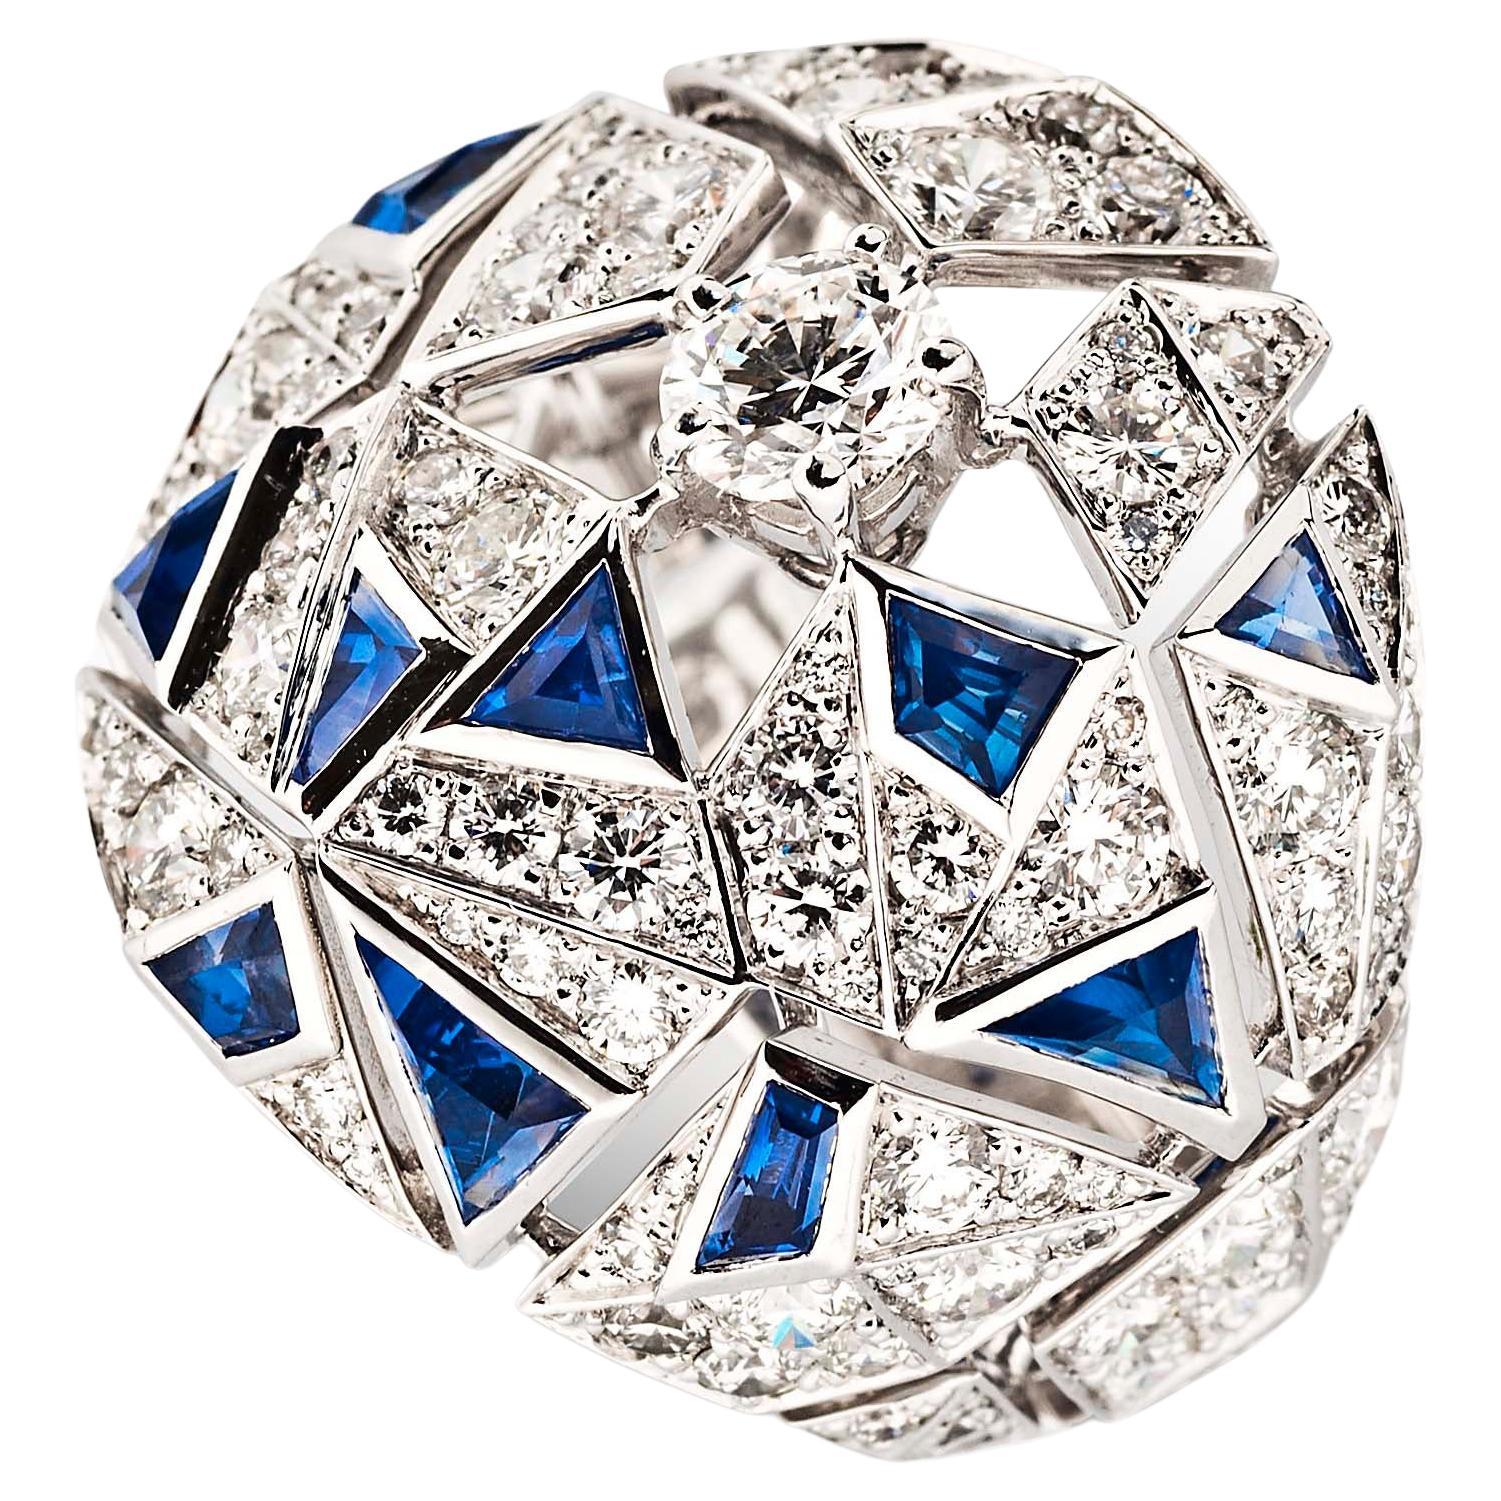 Chanel High Jewelry 18K White Gold, Sapphire and Diamond “Muse” Ring For Sale